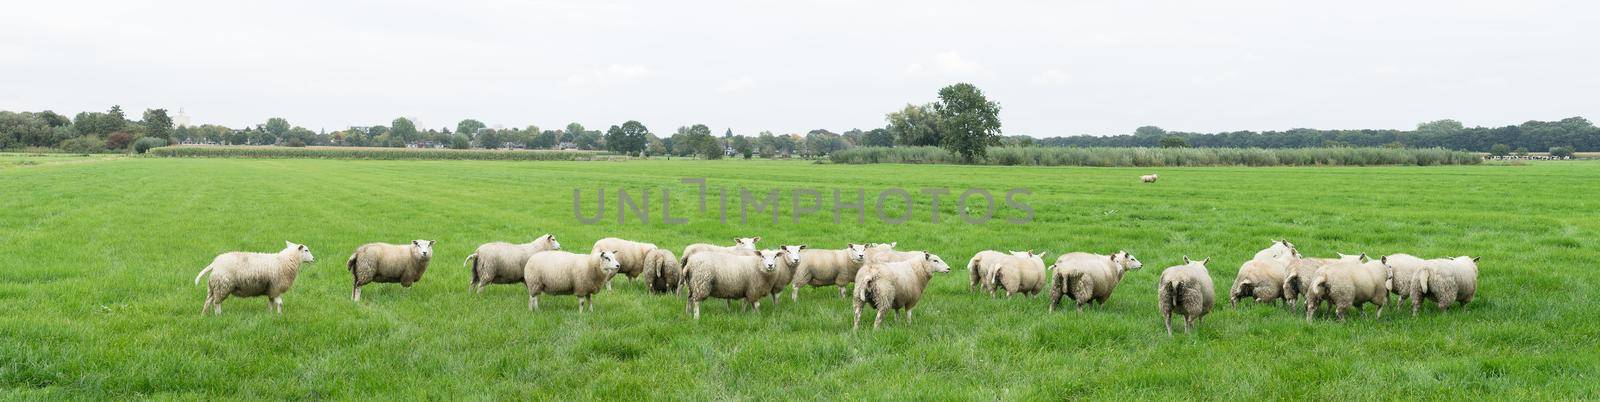 Group of sheep grazing in a Dutch meadow at summertime by LeoniekvanderVliet